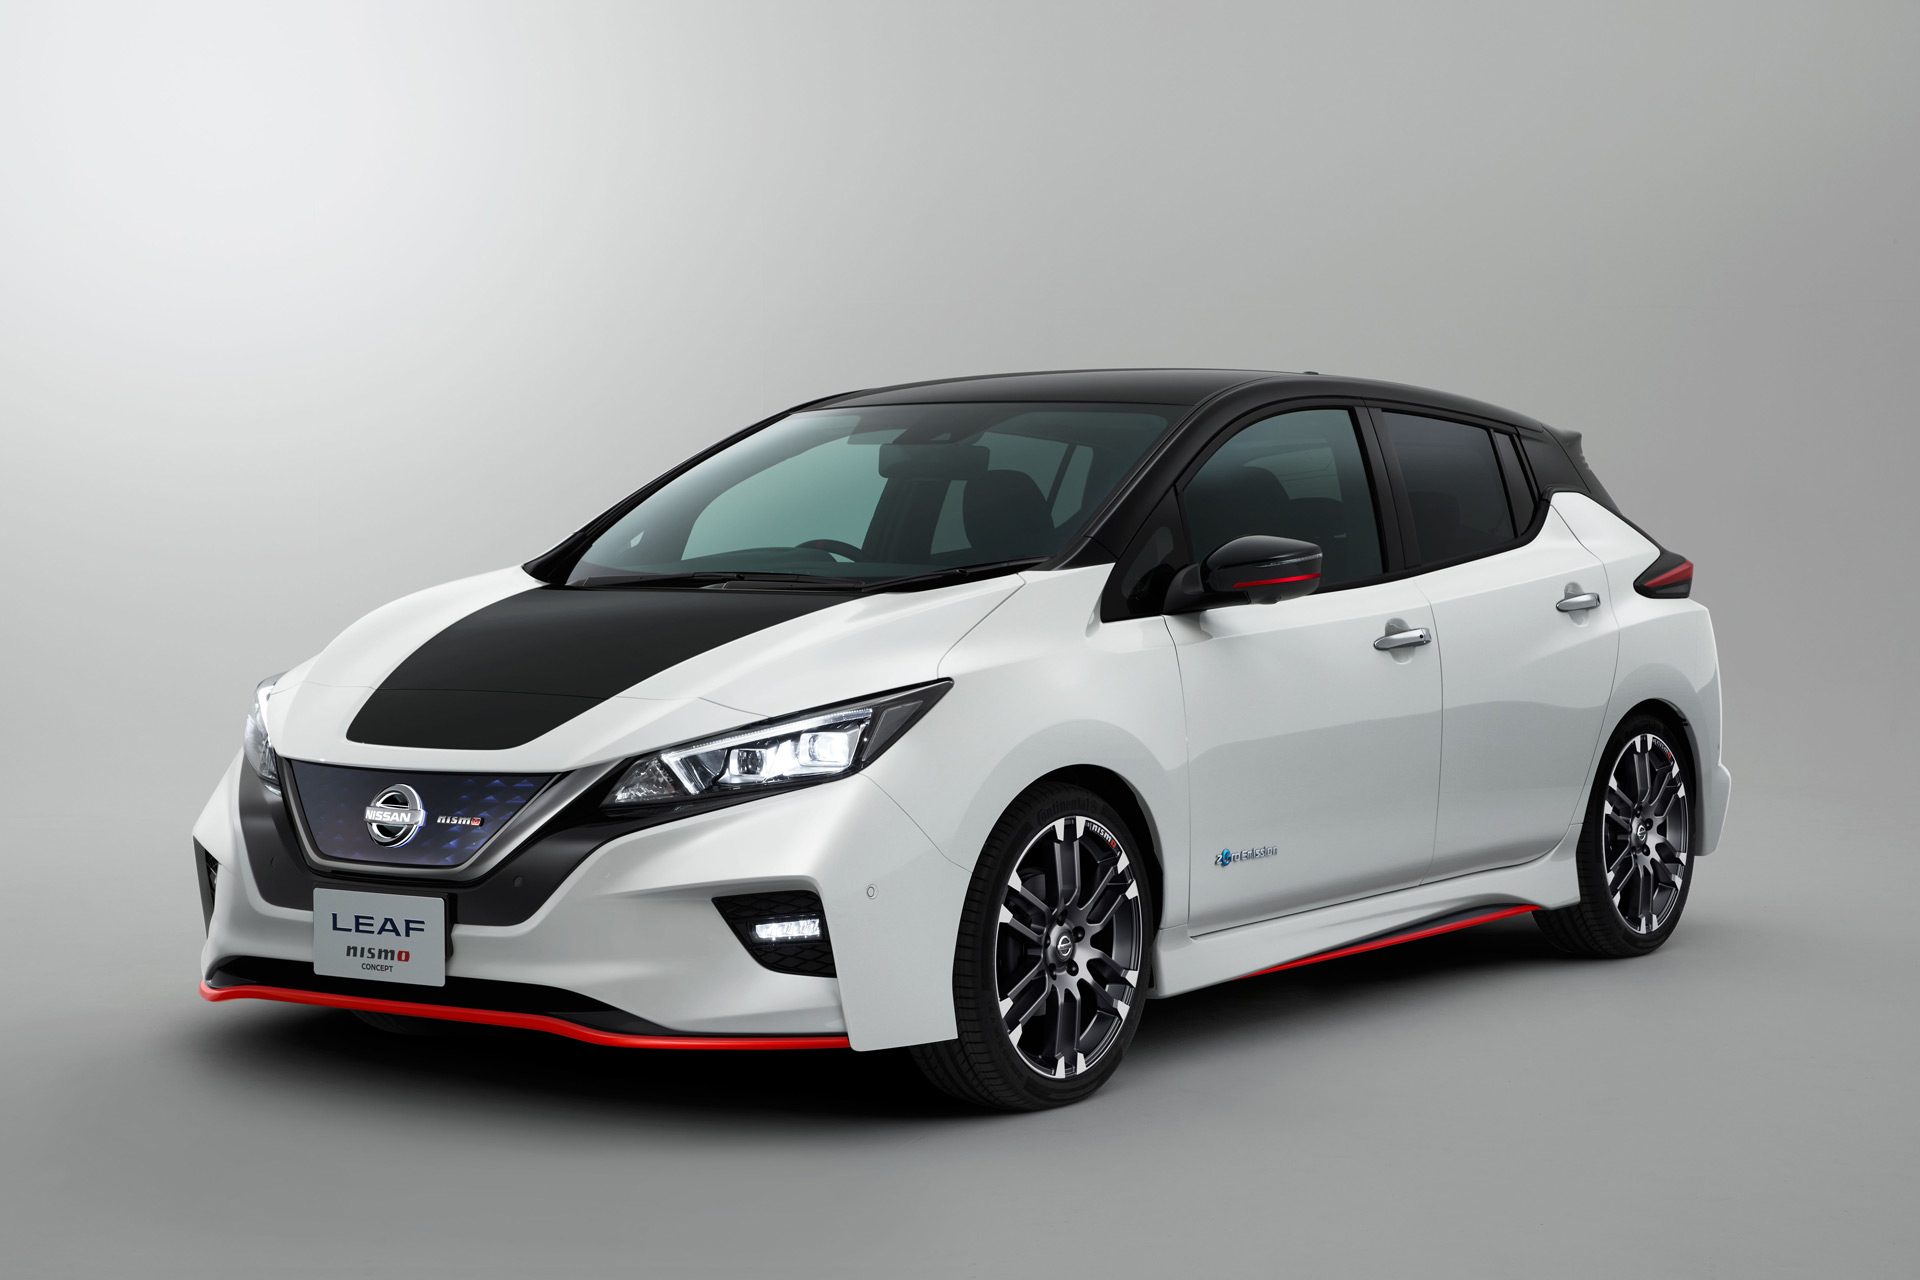 Sportier Nissan Leaf Nismo Concept for Tokyo show ...